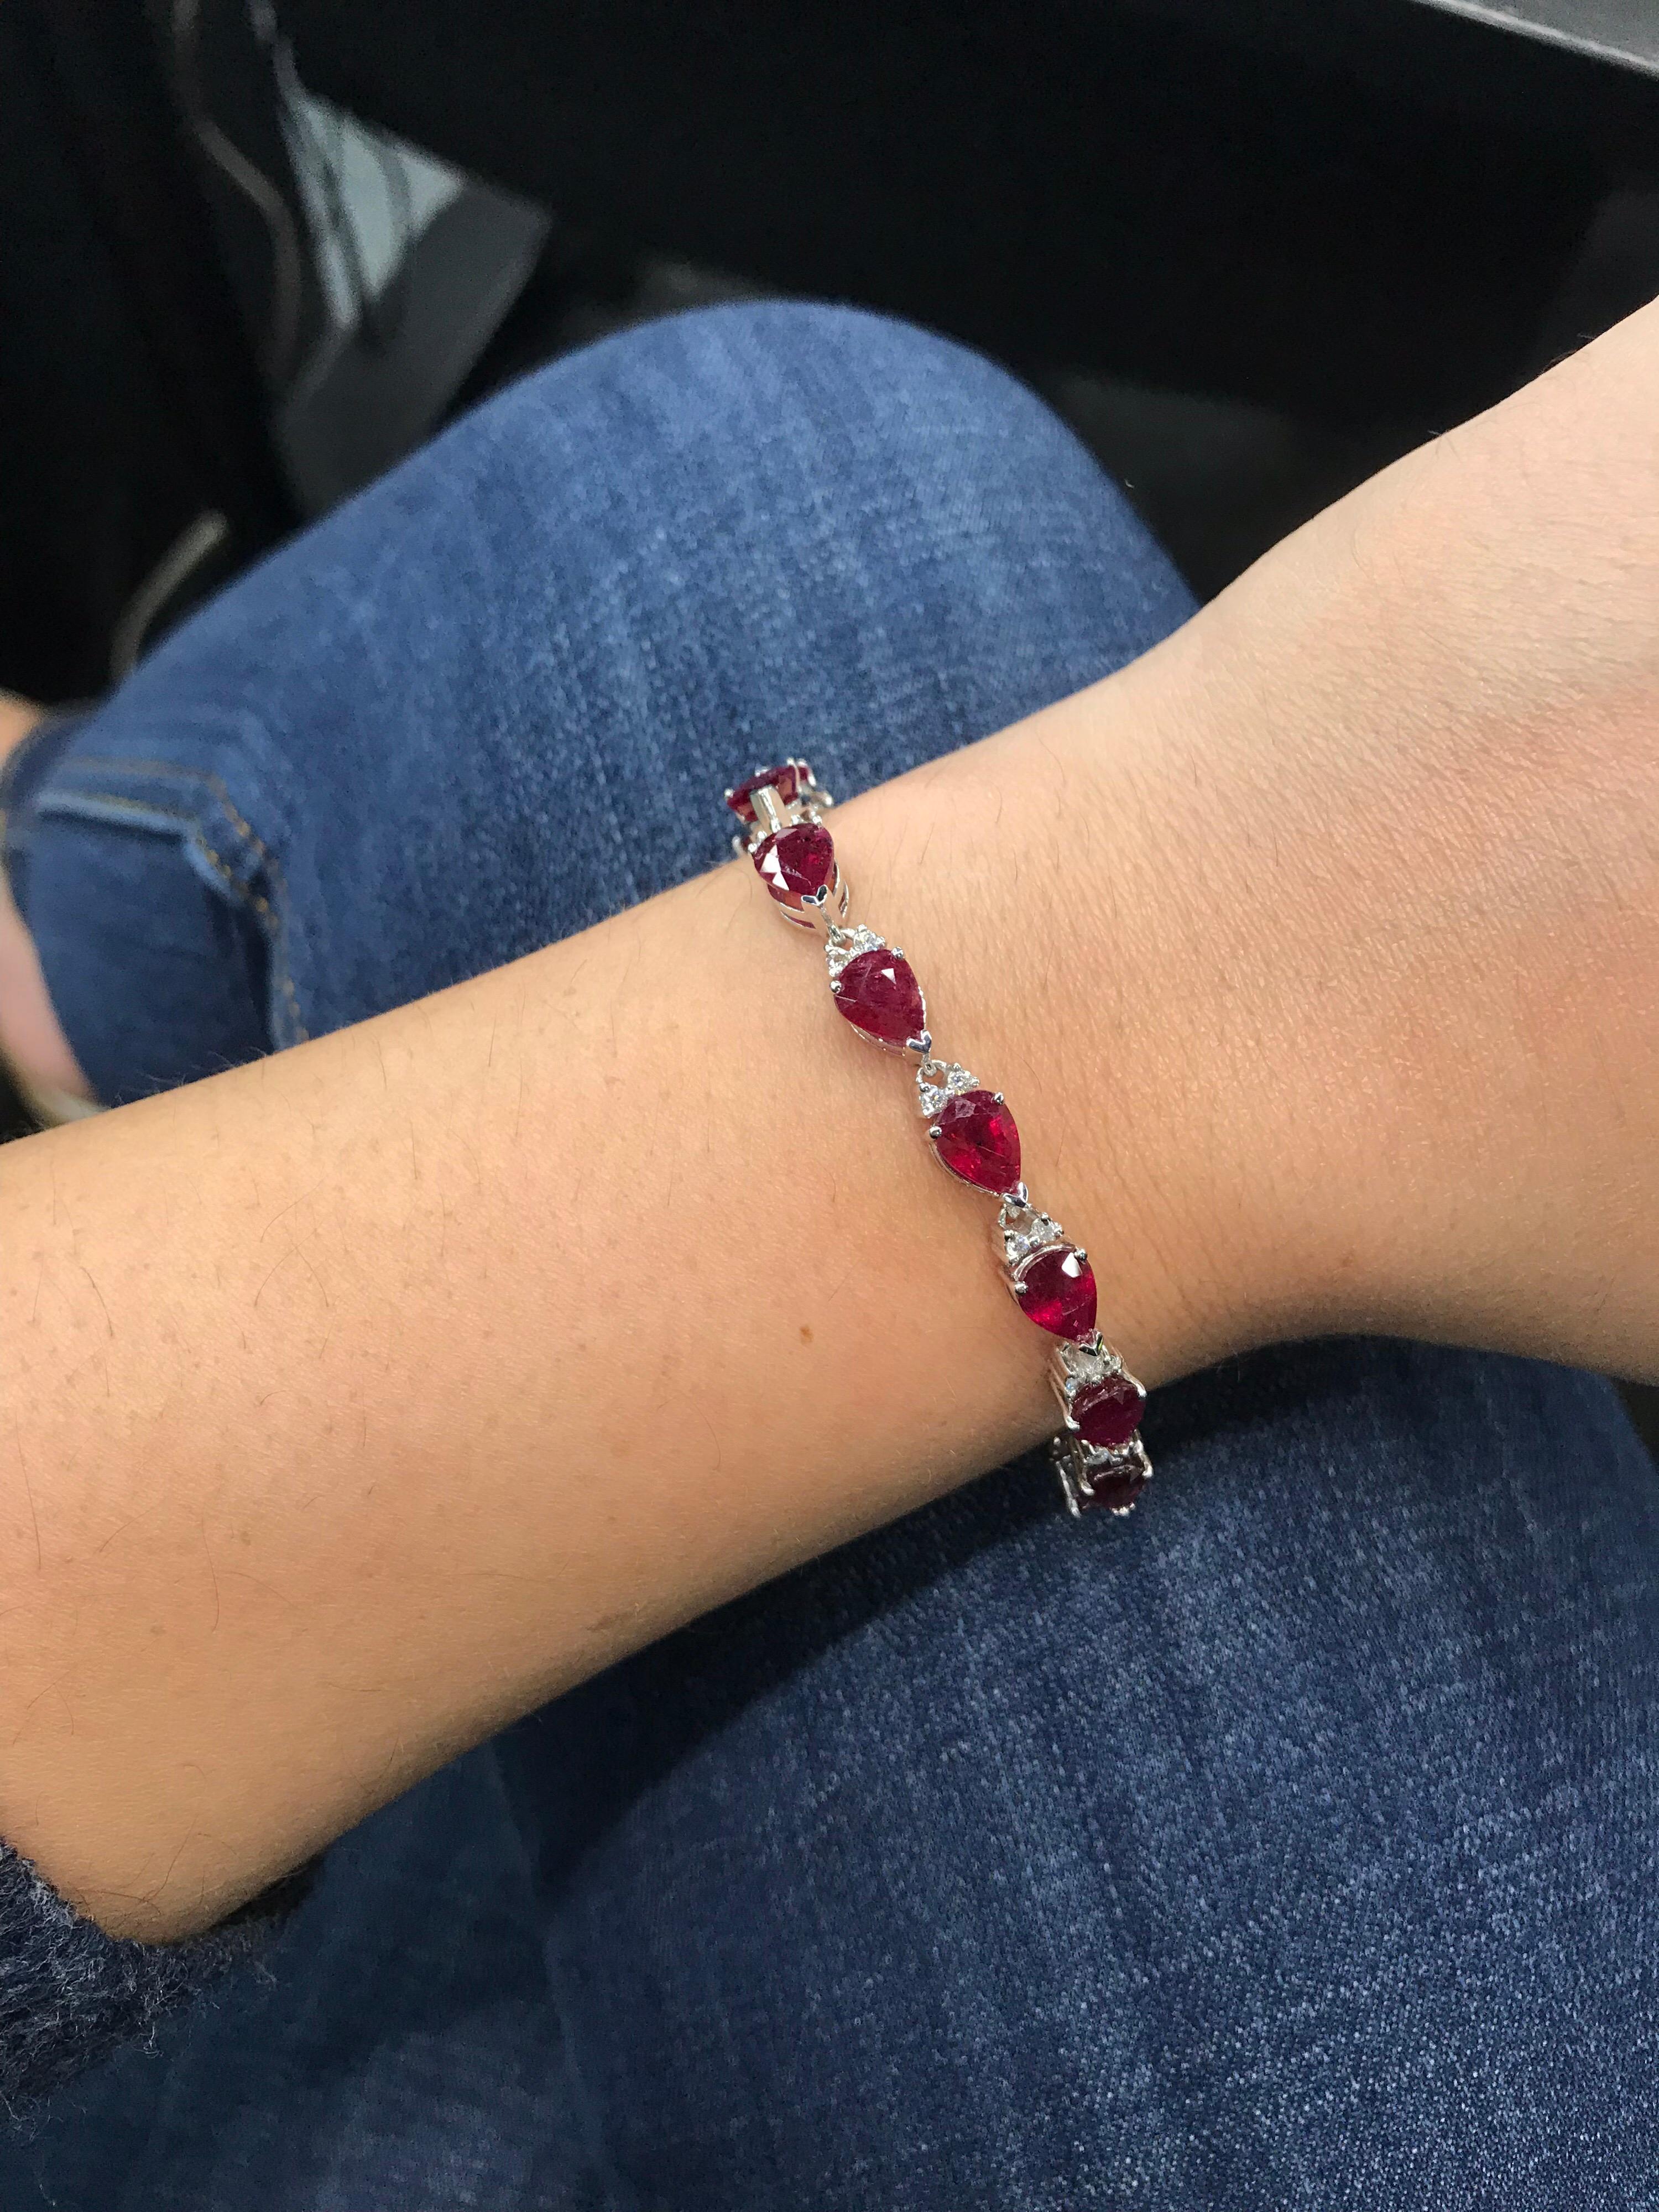 14K White gold tennis bracelet featuring 15 pear shape red rubies, 19.77 carats, with alerternating rounf brilliants weighing 0.90 carats